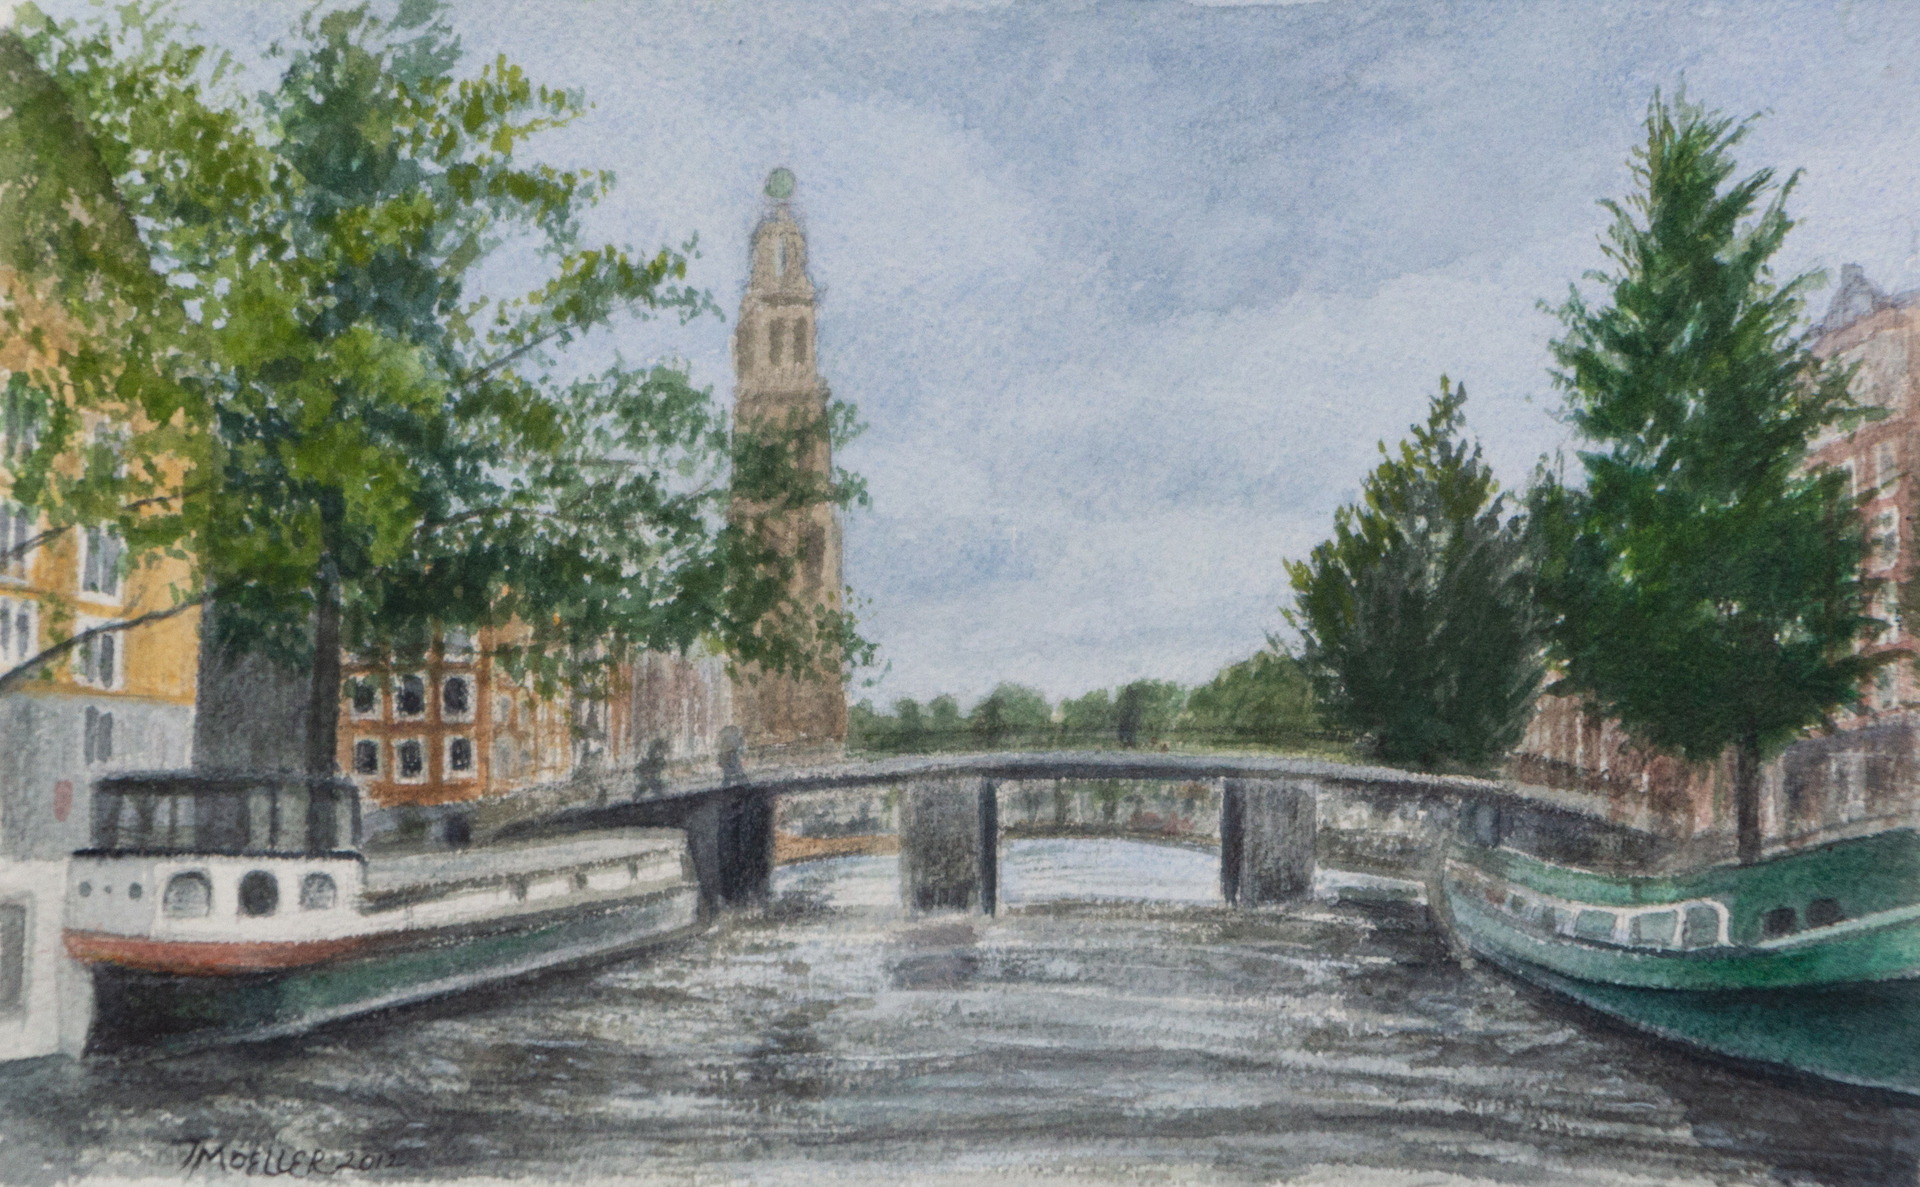 Sketchbook page  "Amsterdam Canal"   6" X 10"     watercolor